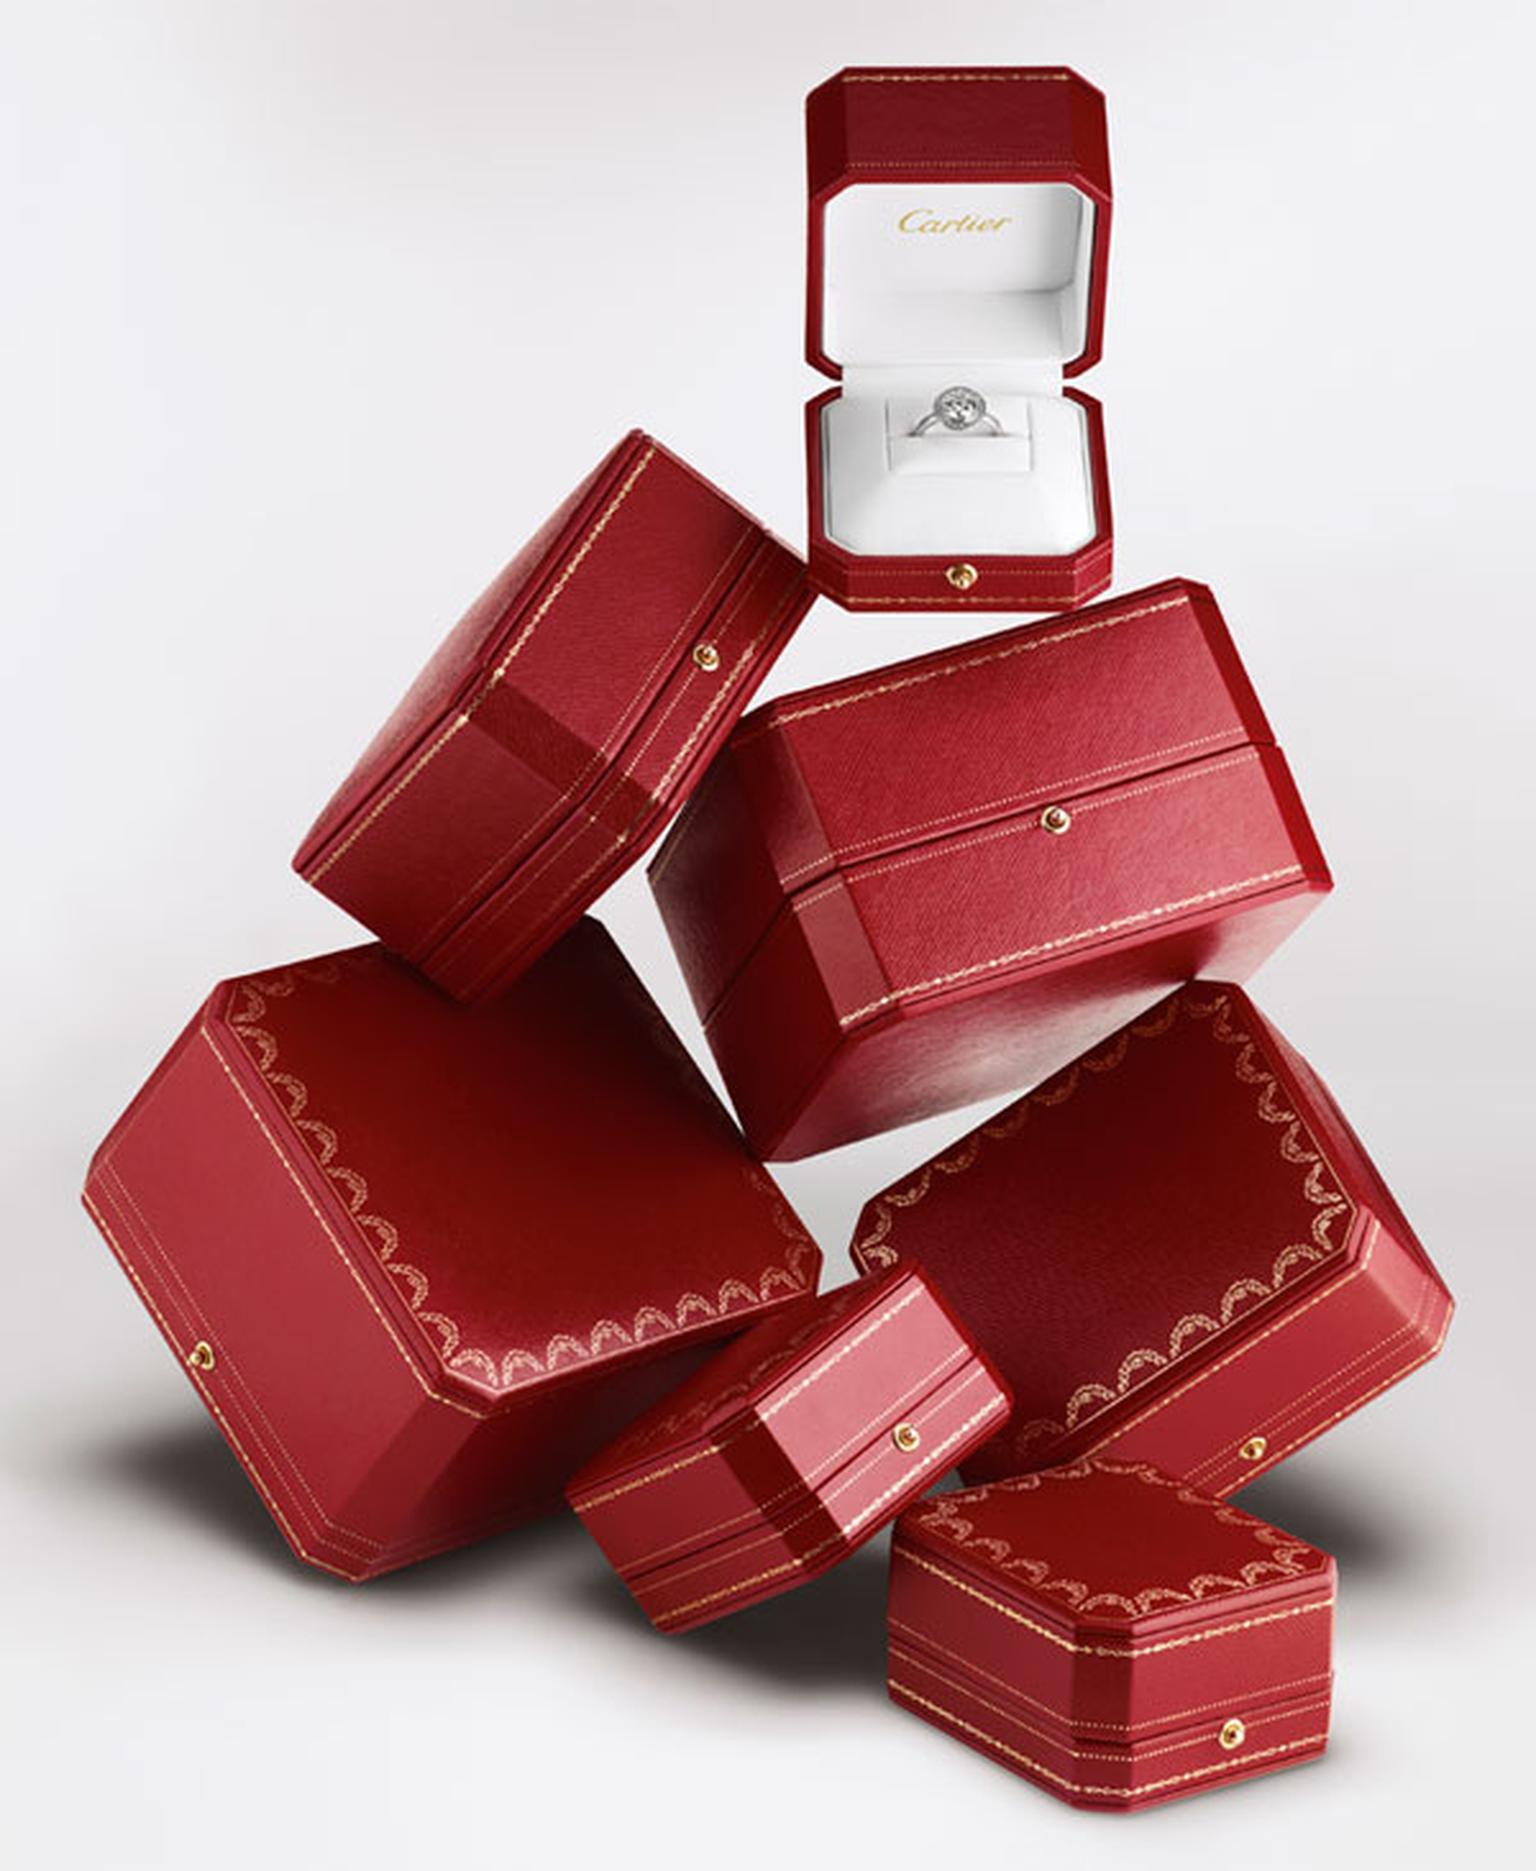 Cartier-boxes-and-Cartier-d’Amour-solitaire